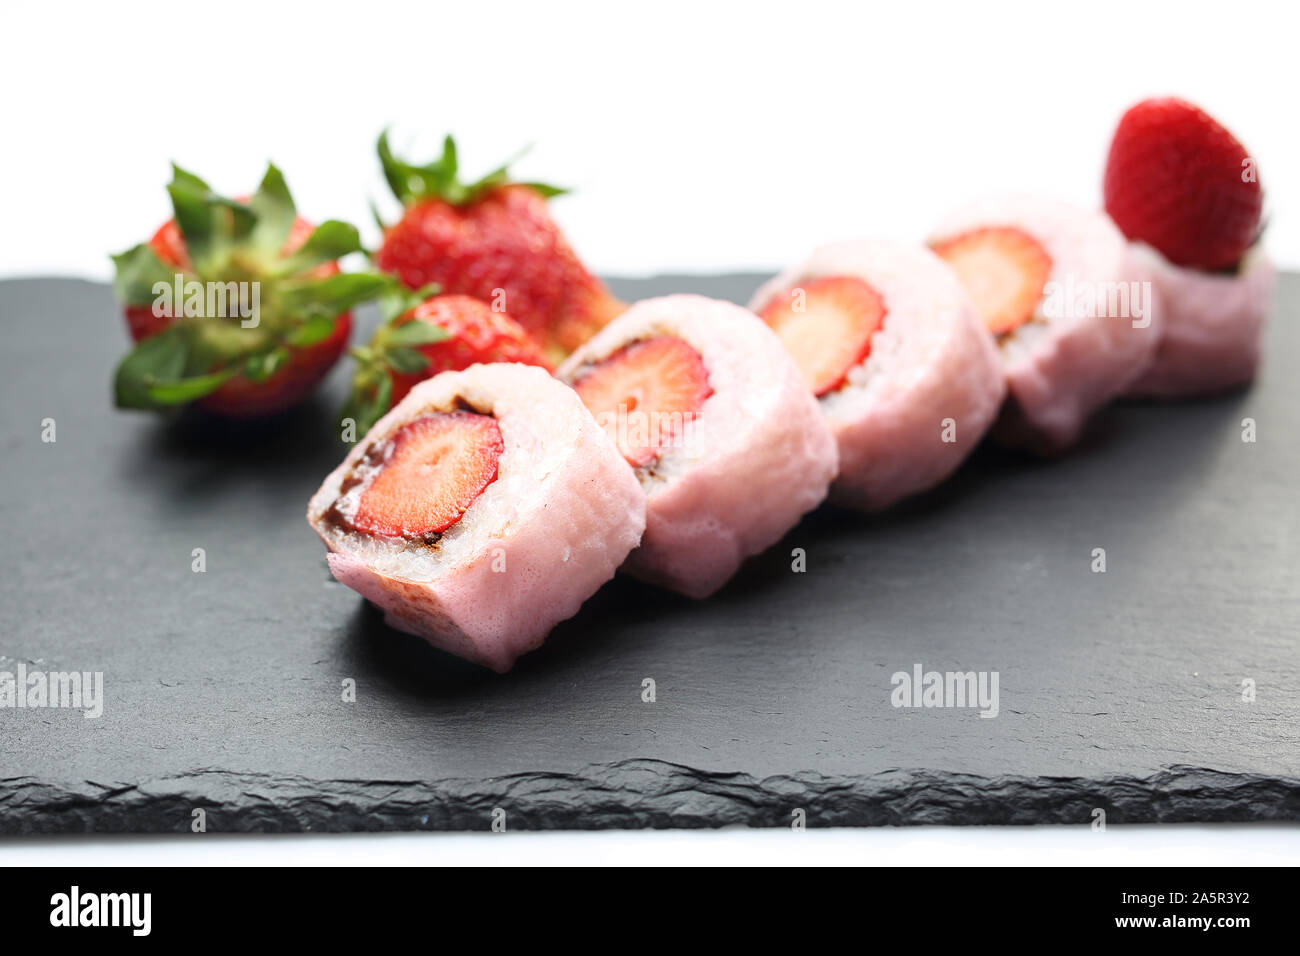 Fruit sushi, a sushi roll with strawberry and chocolate. Stock Photo